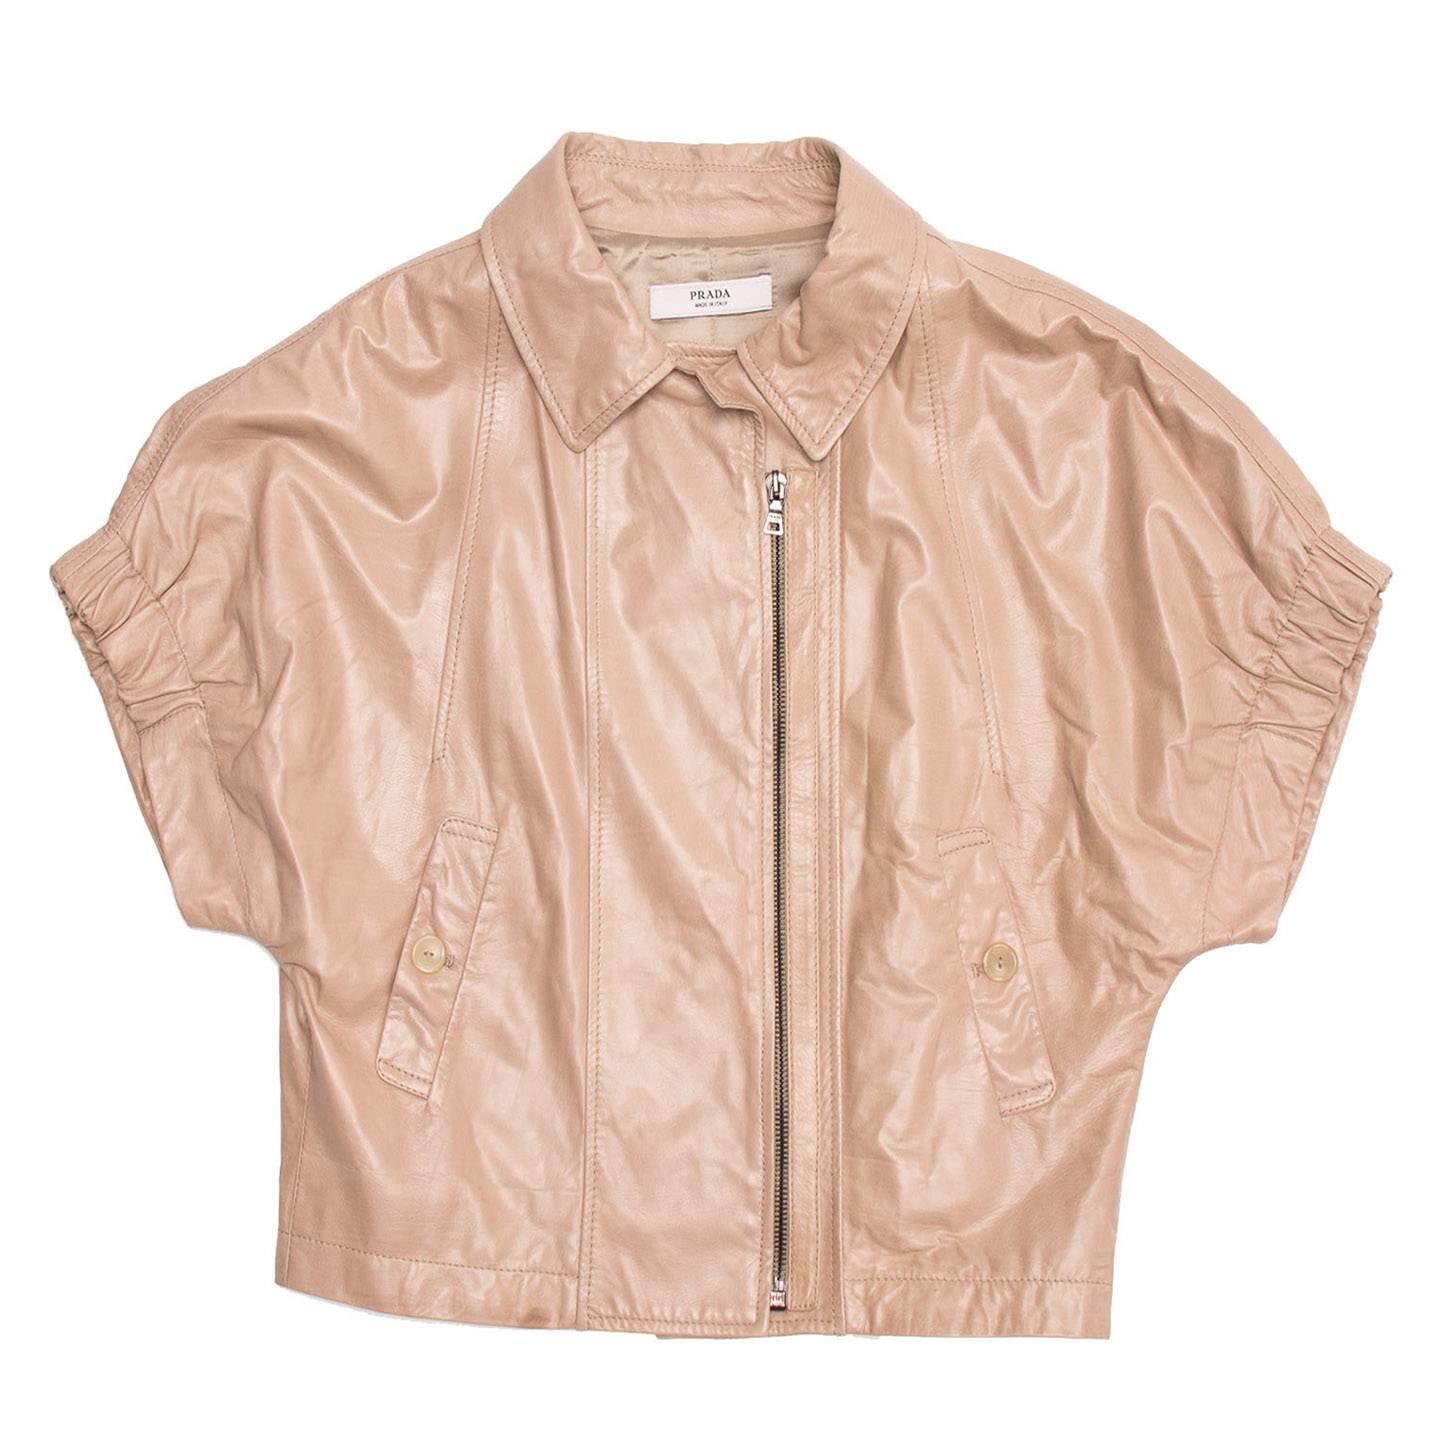 Tan cropped bolero collared short-sleeve soft leather jacket with side front zipper opening.

Size  46 Italian sizing

Condition  Excellent: never worn